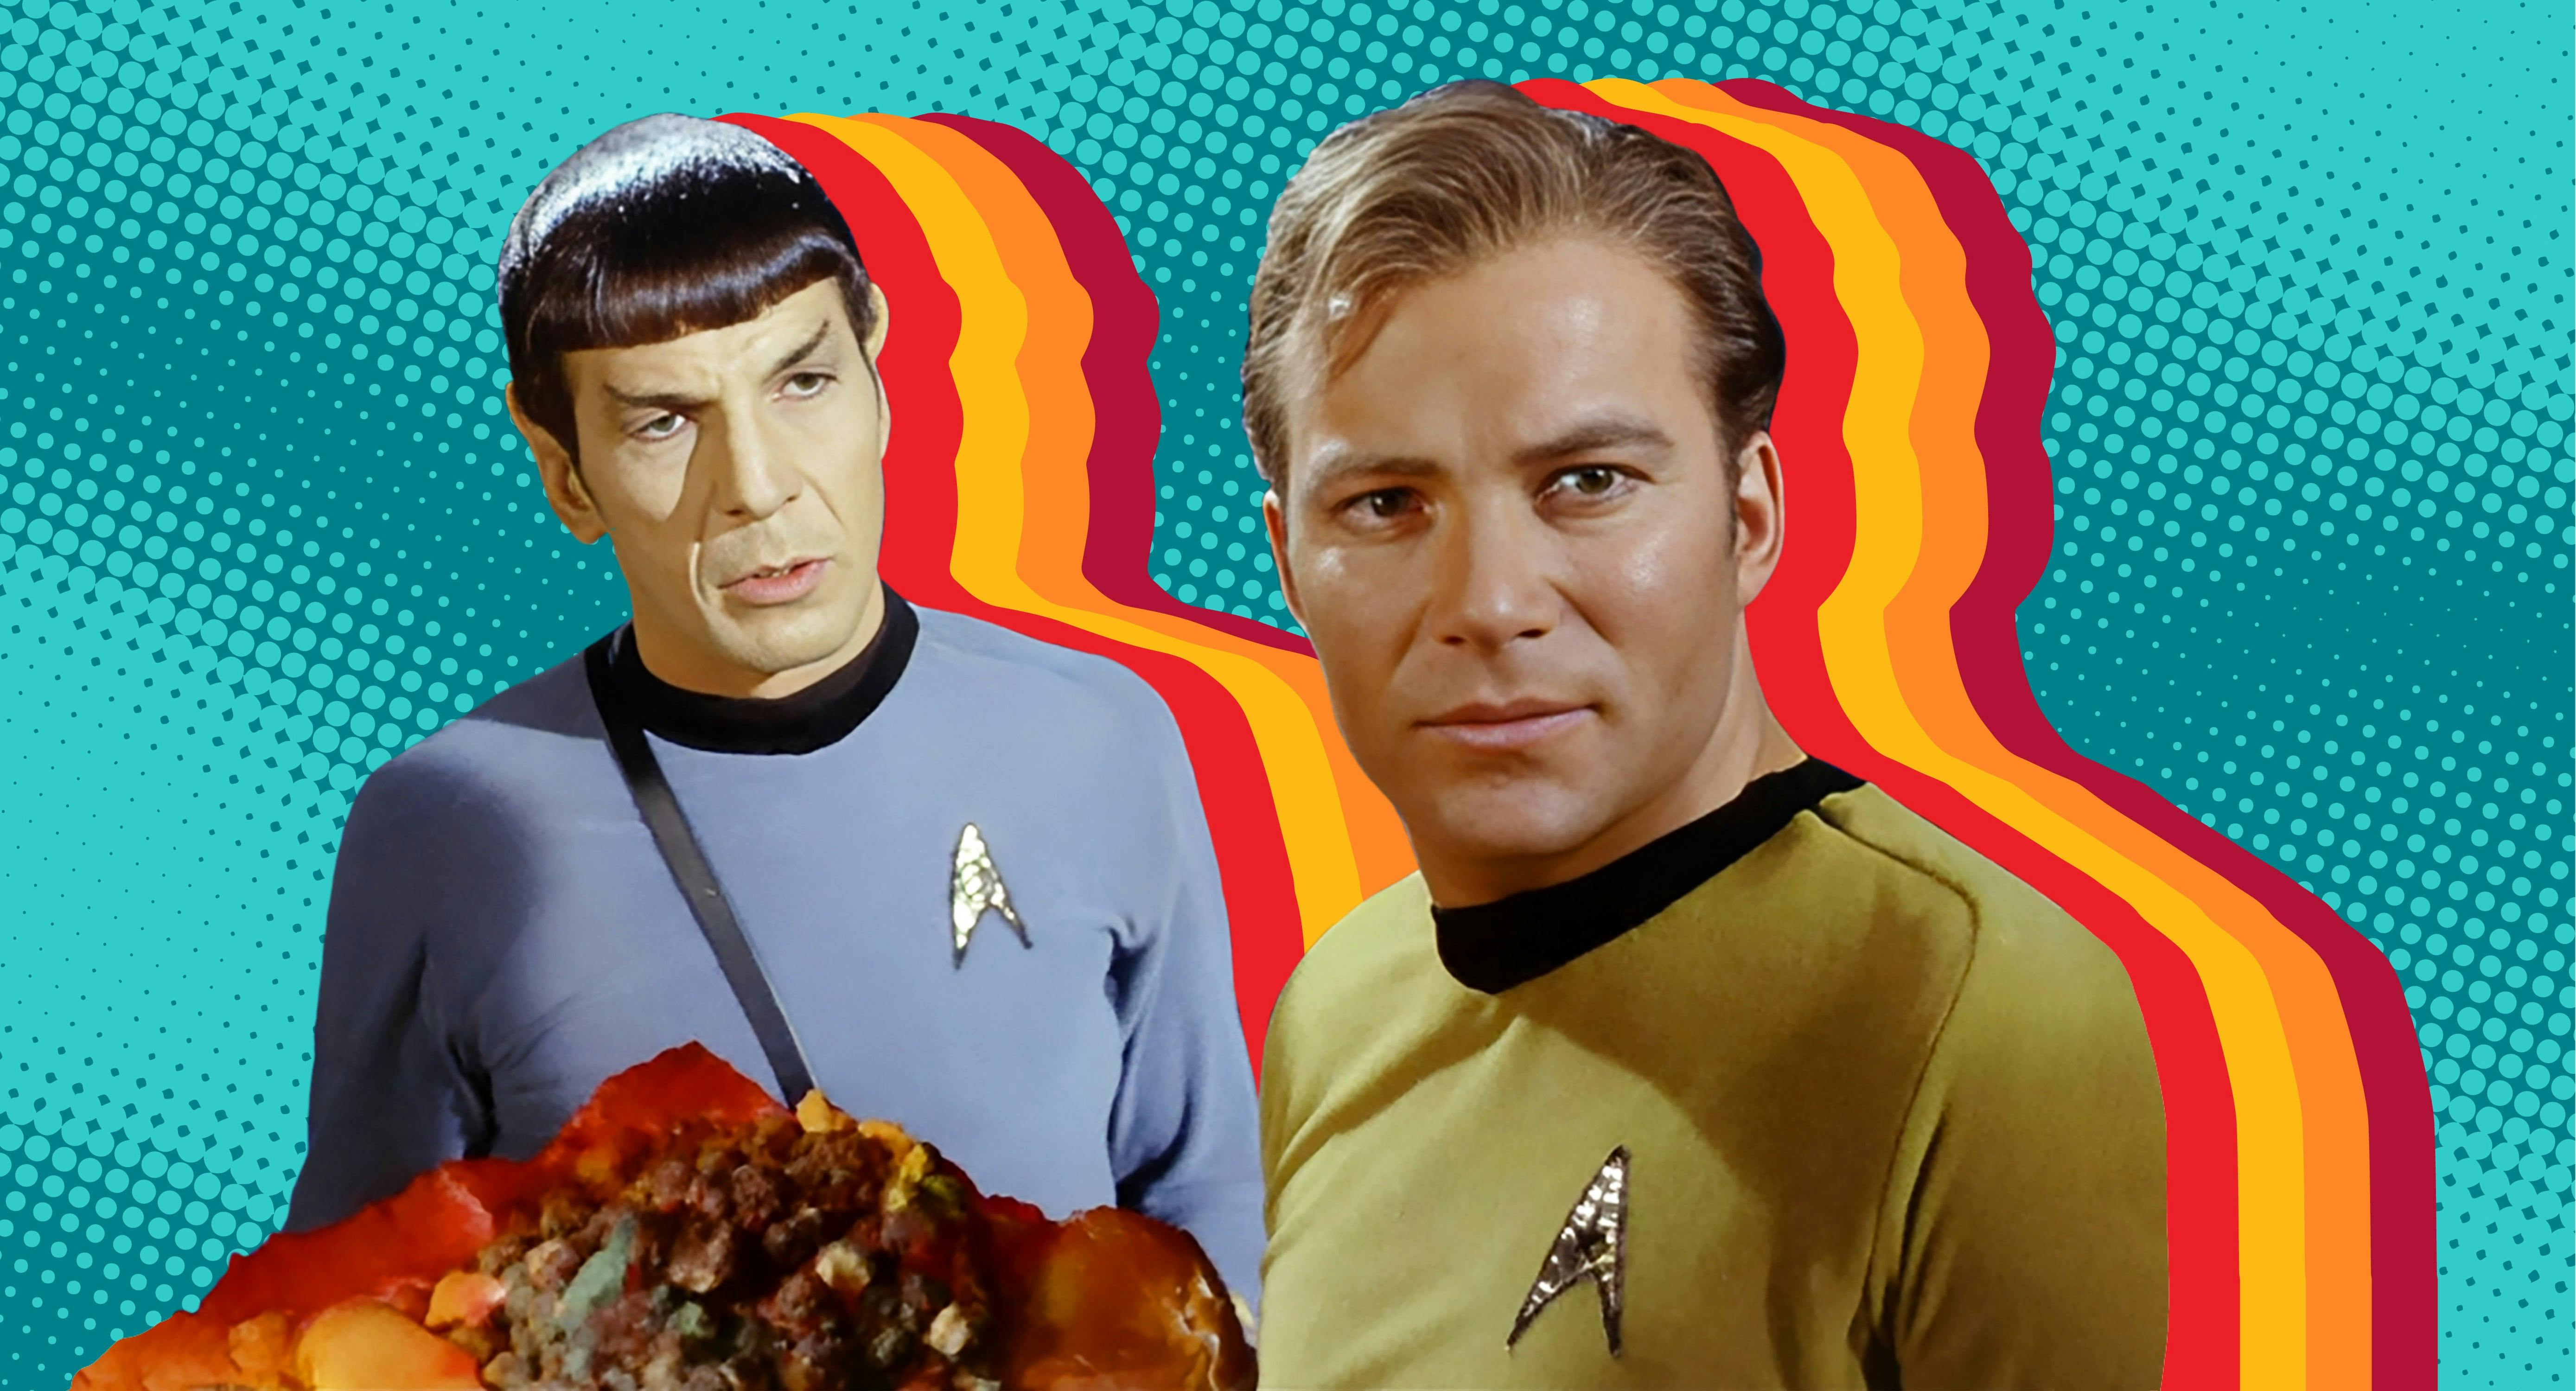 Illustrated banner featuring Spock and Kirk